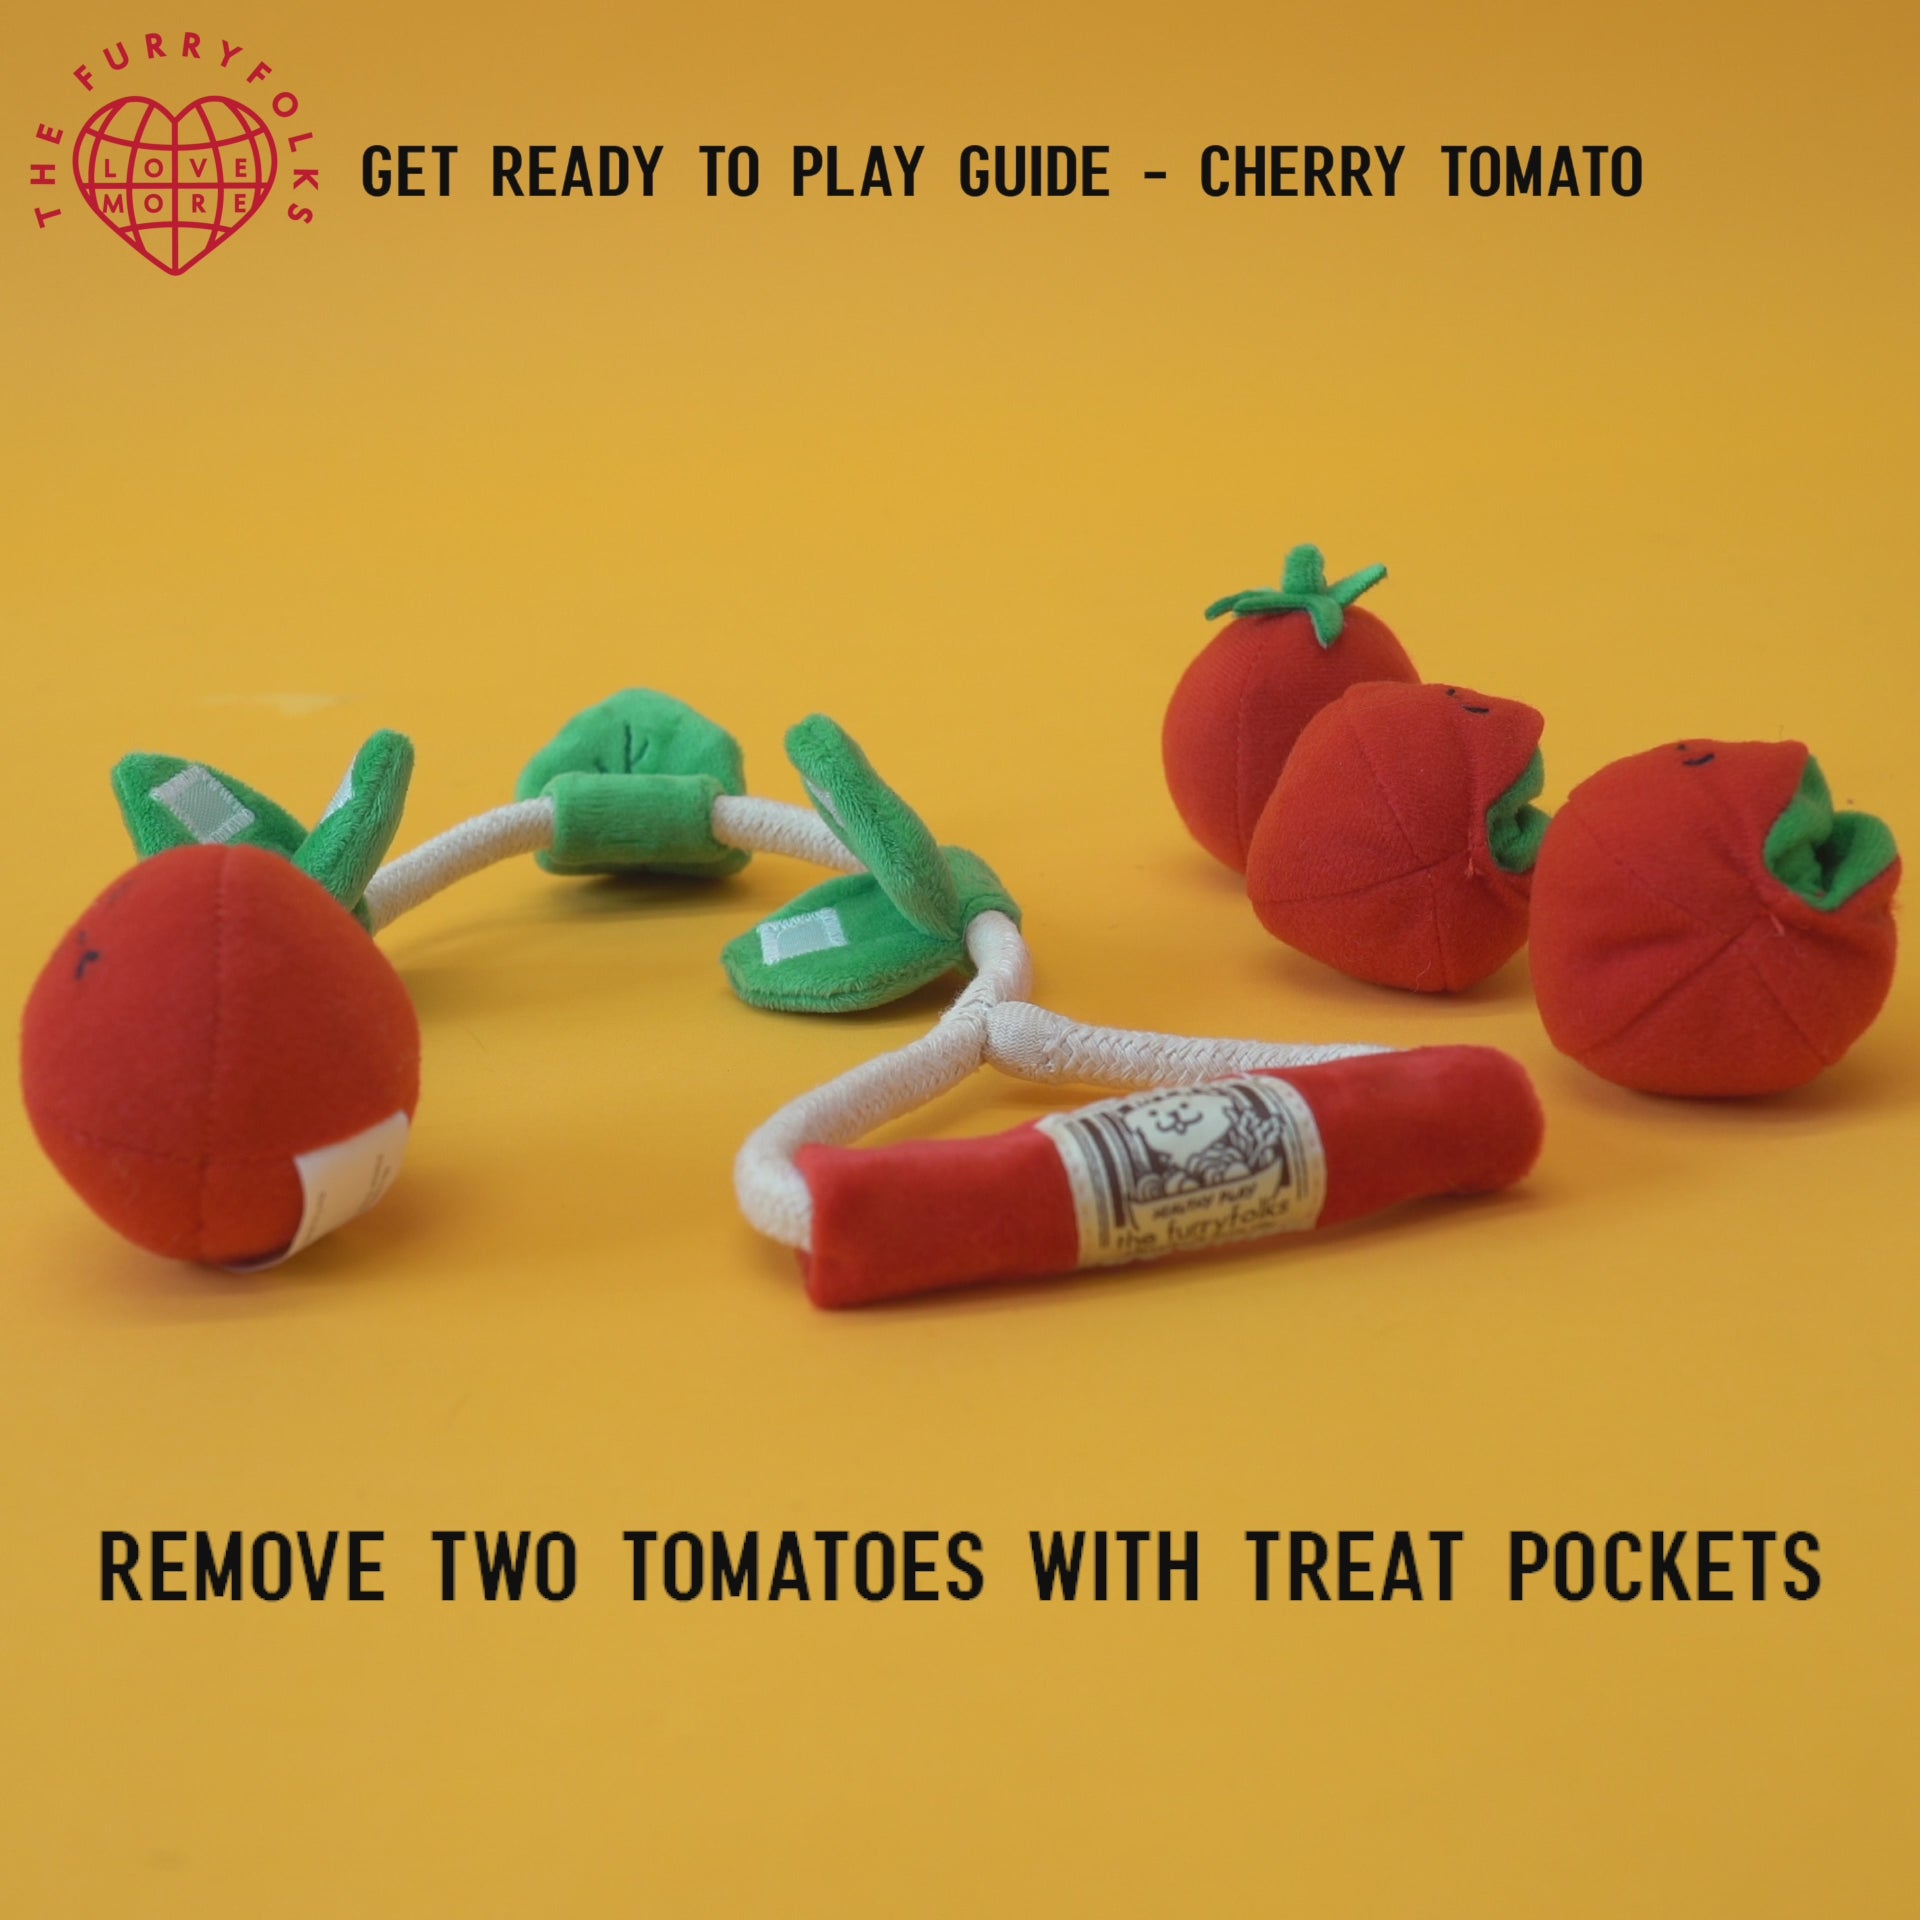 VIDEO for "get ready to play guide - Cherry Tomato"